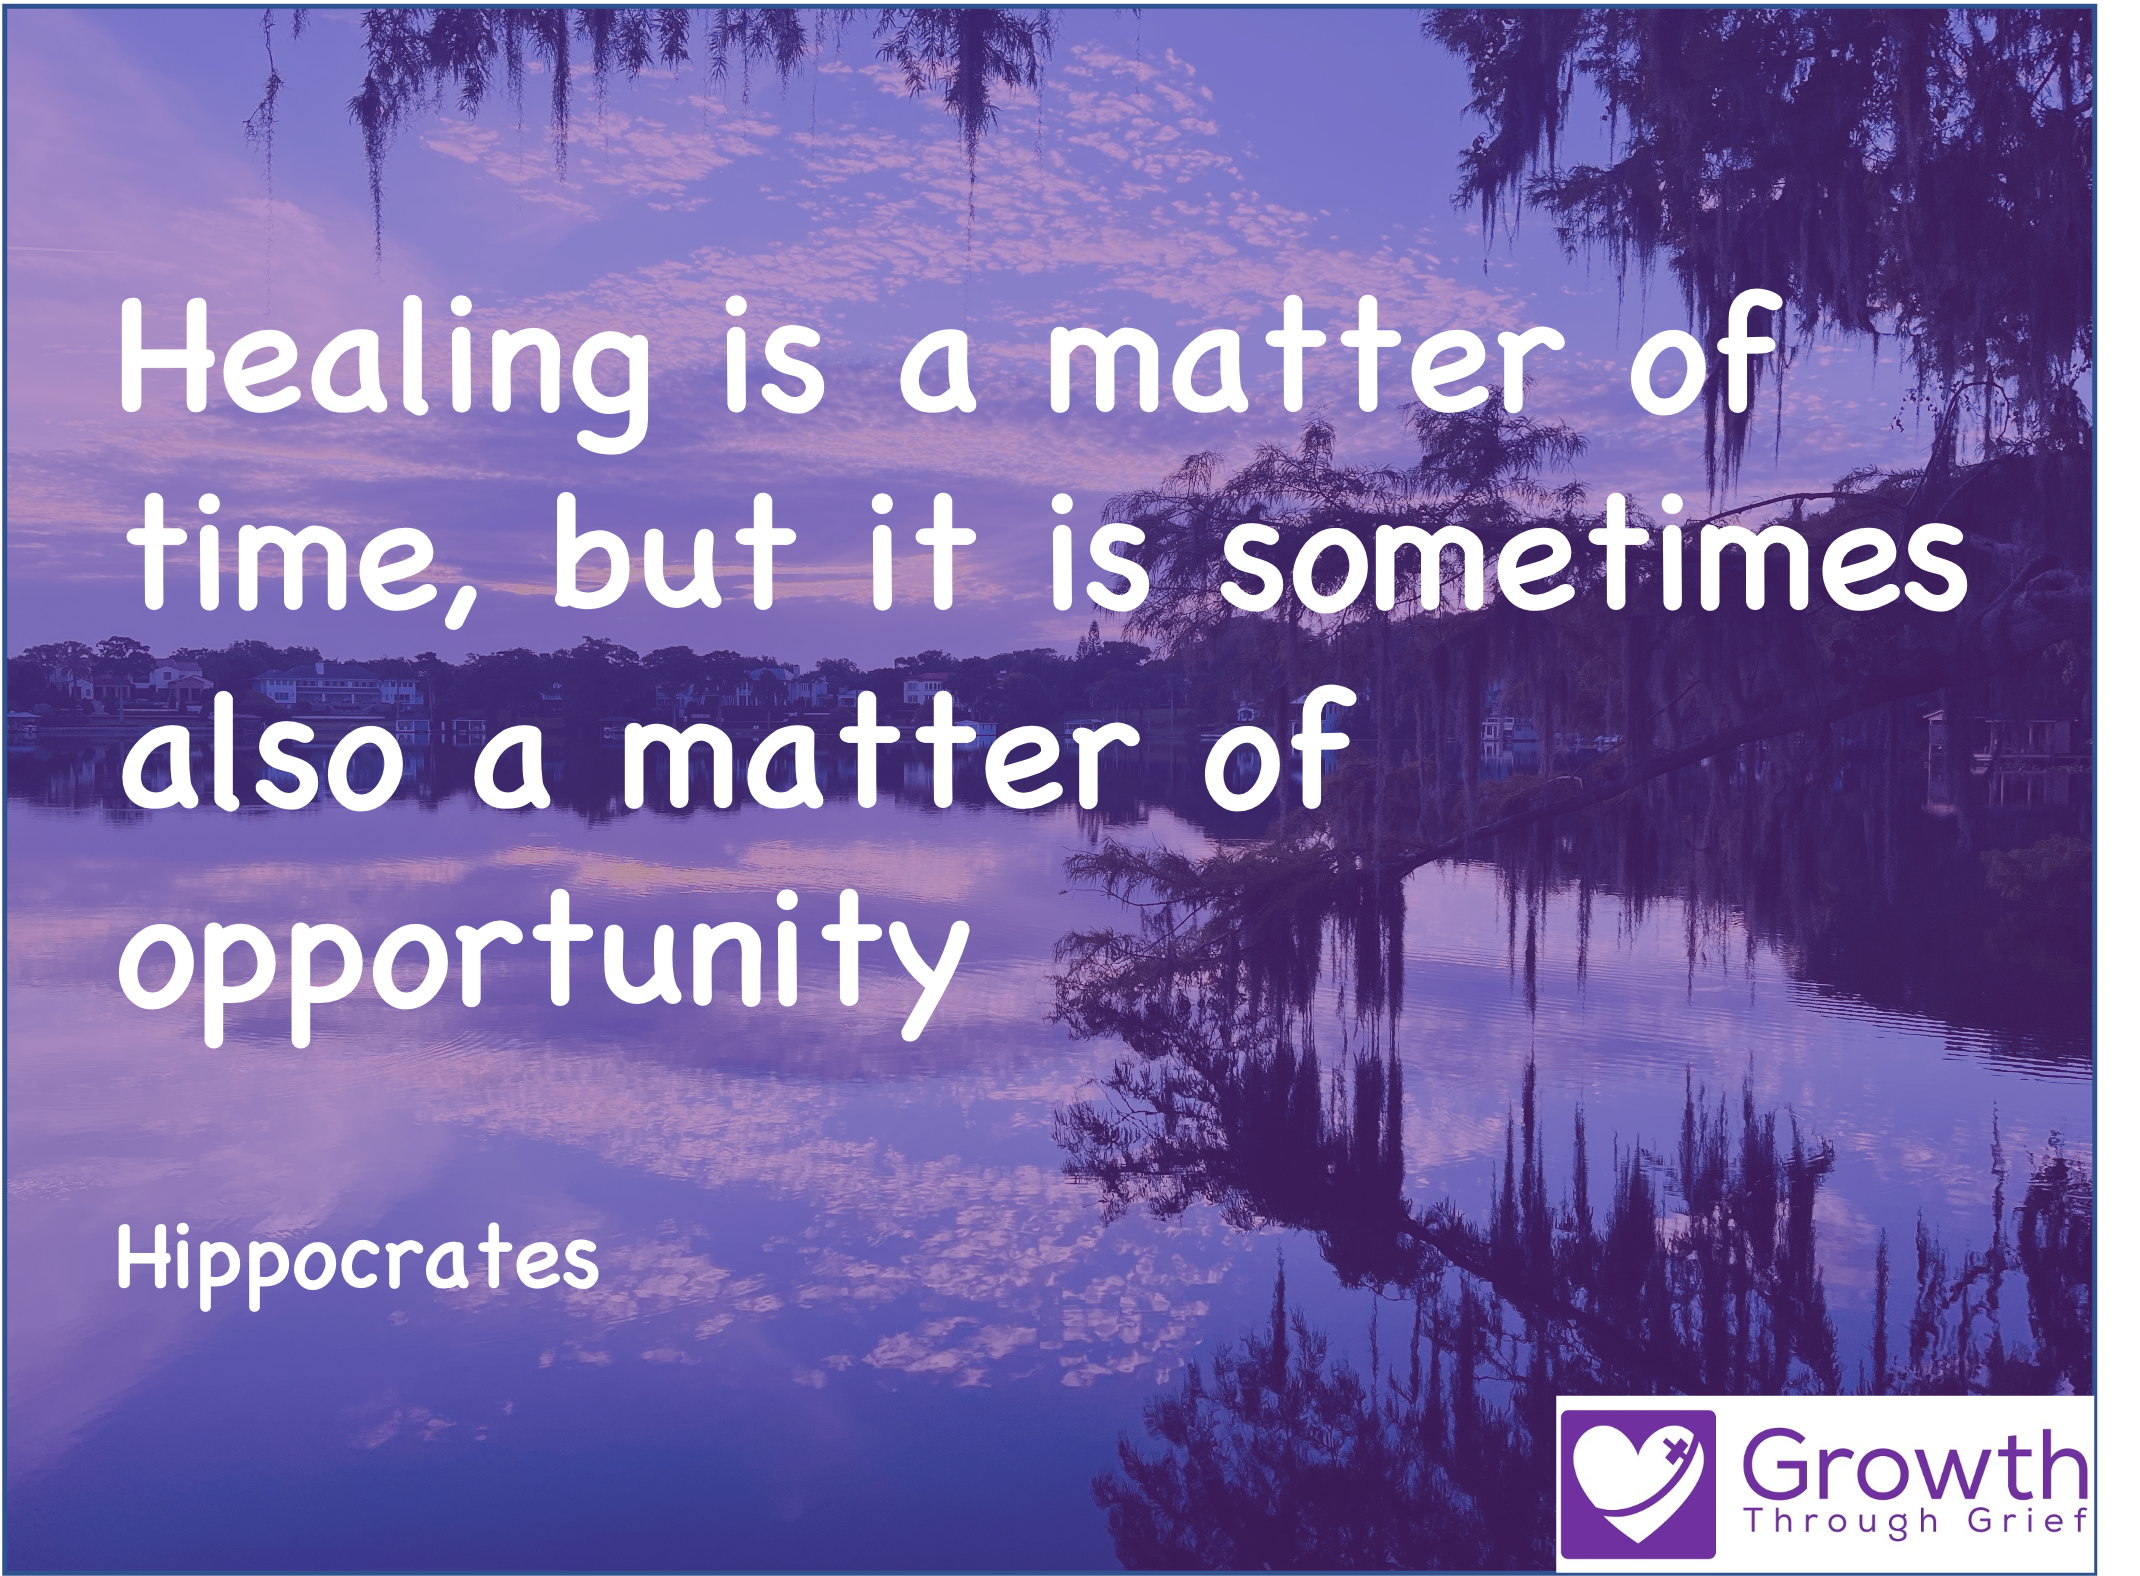 Healing is a matter of time, but it is sometimes a matter of opportunity